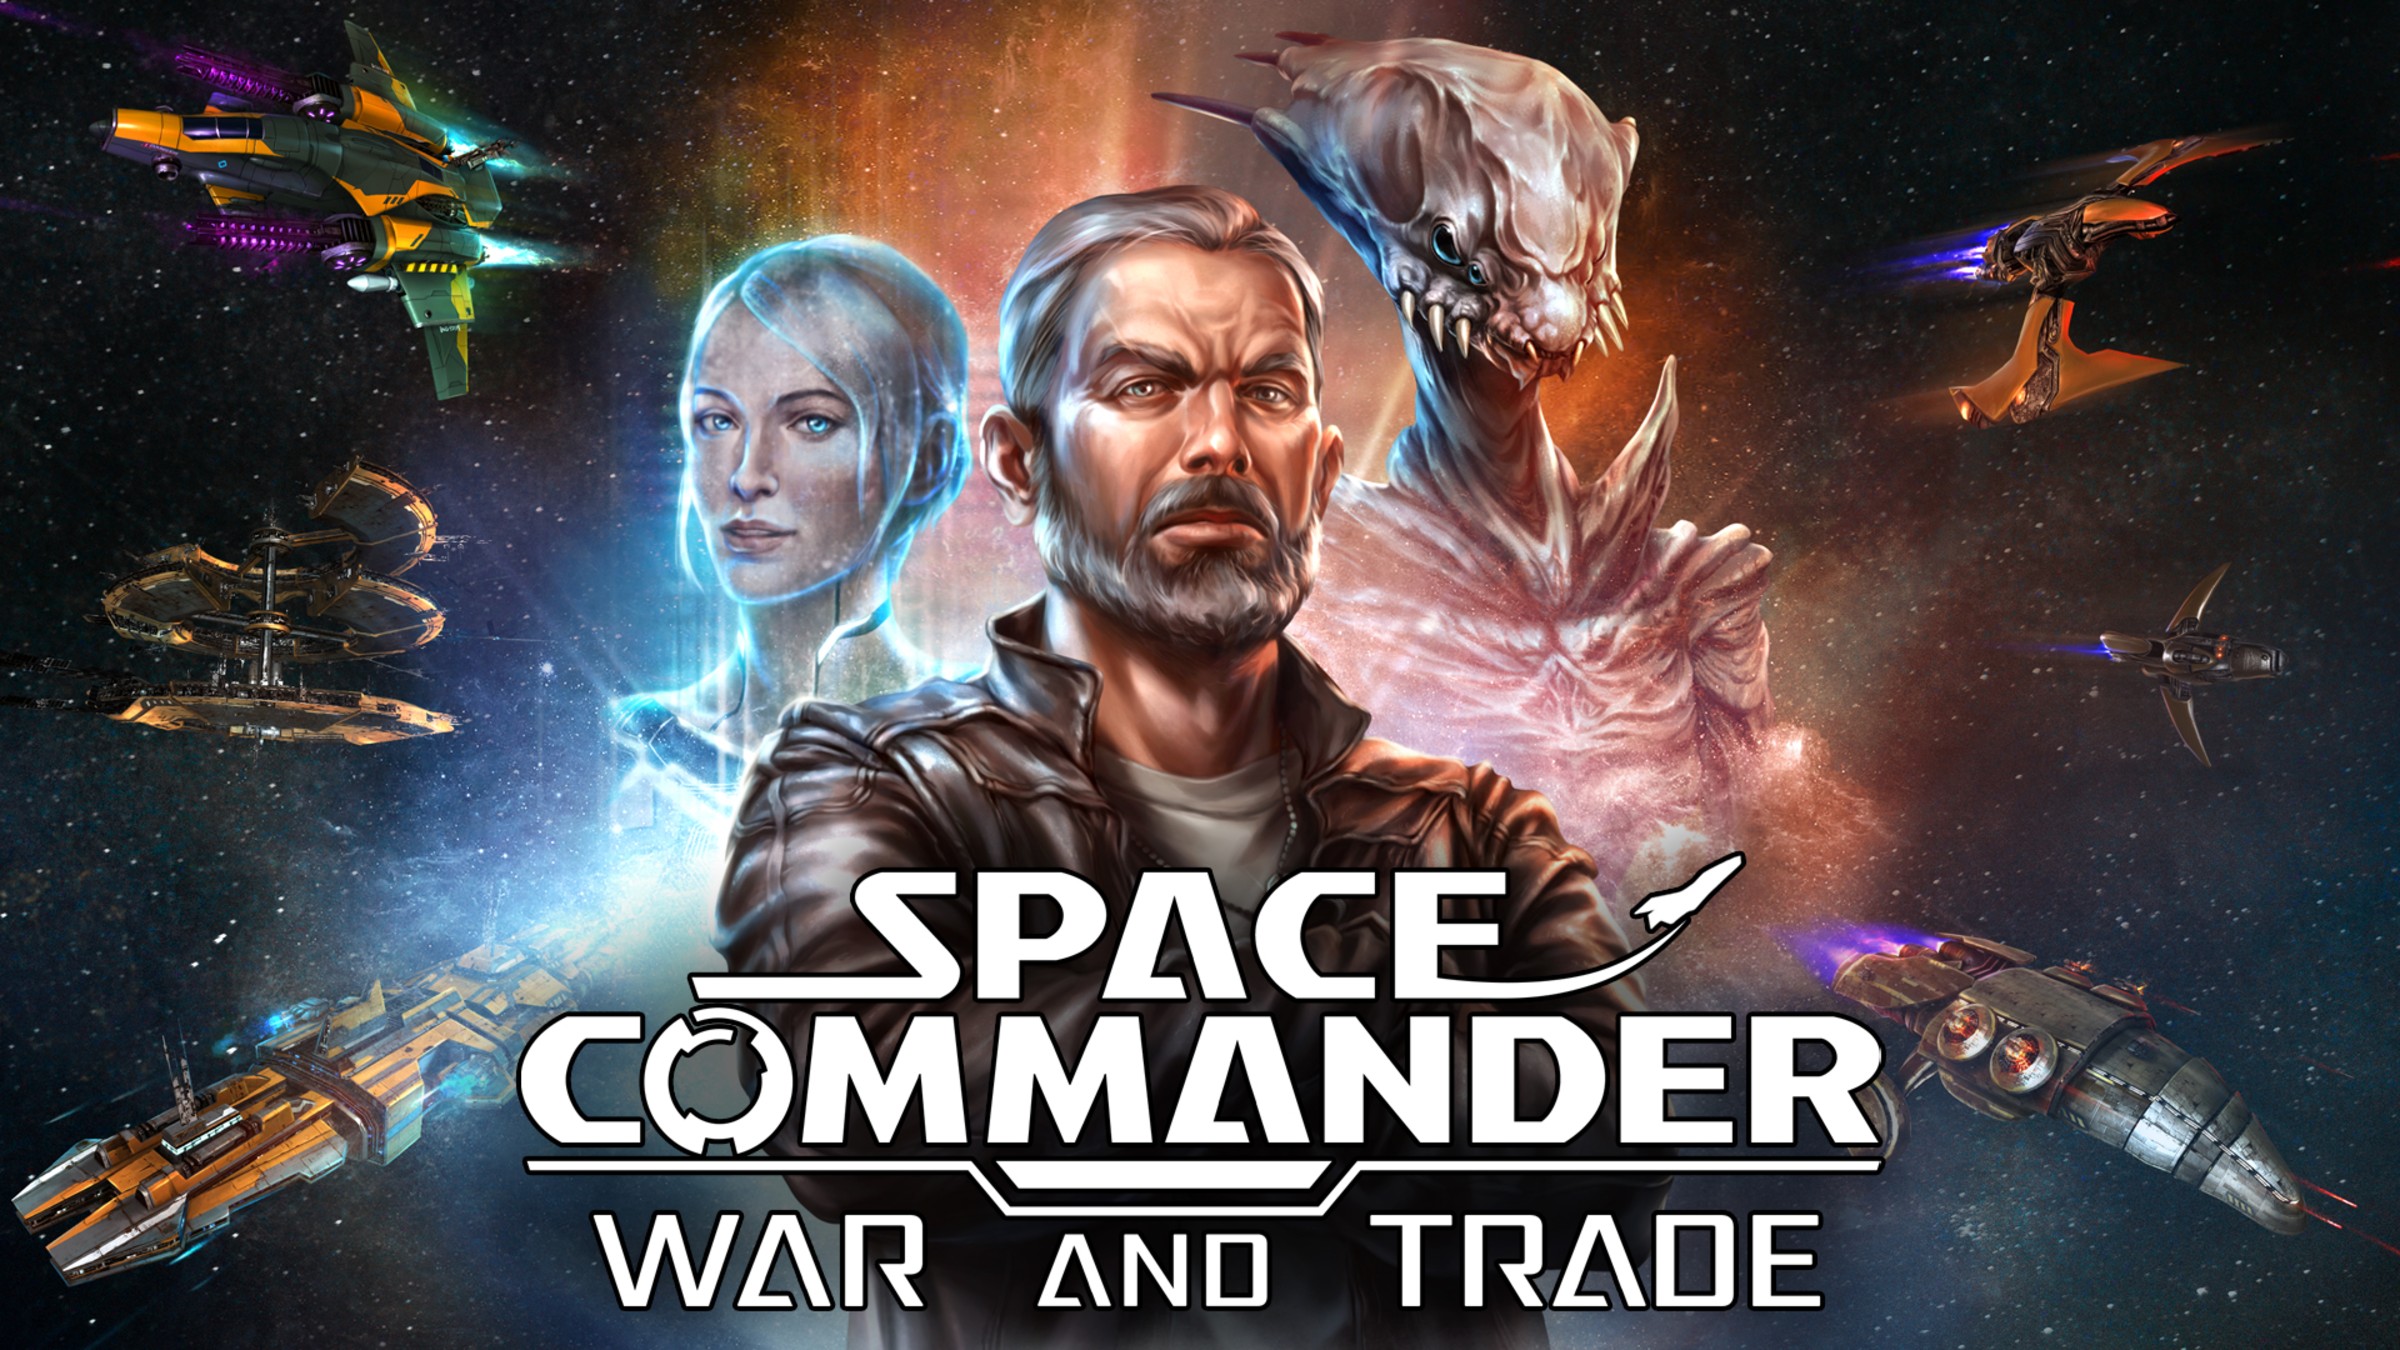 Space Commander: War And Trade For Nintendo Switch - Nintendo Official Site